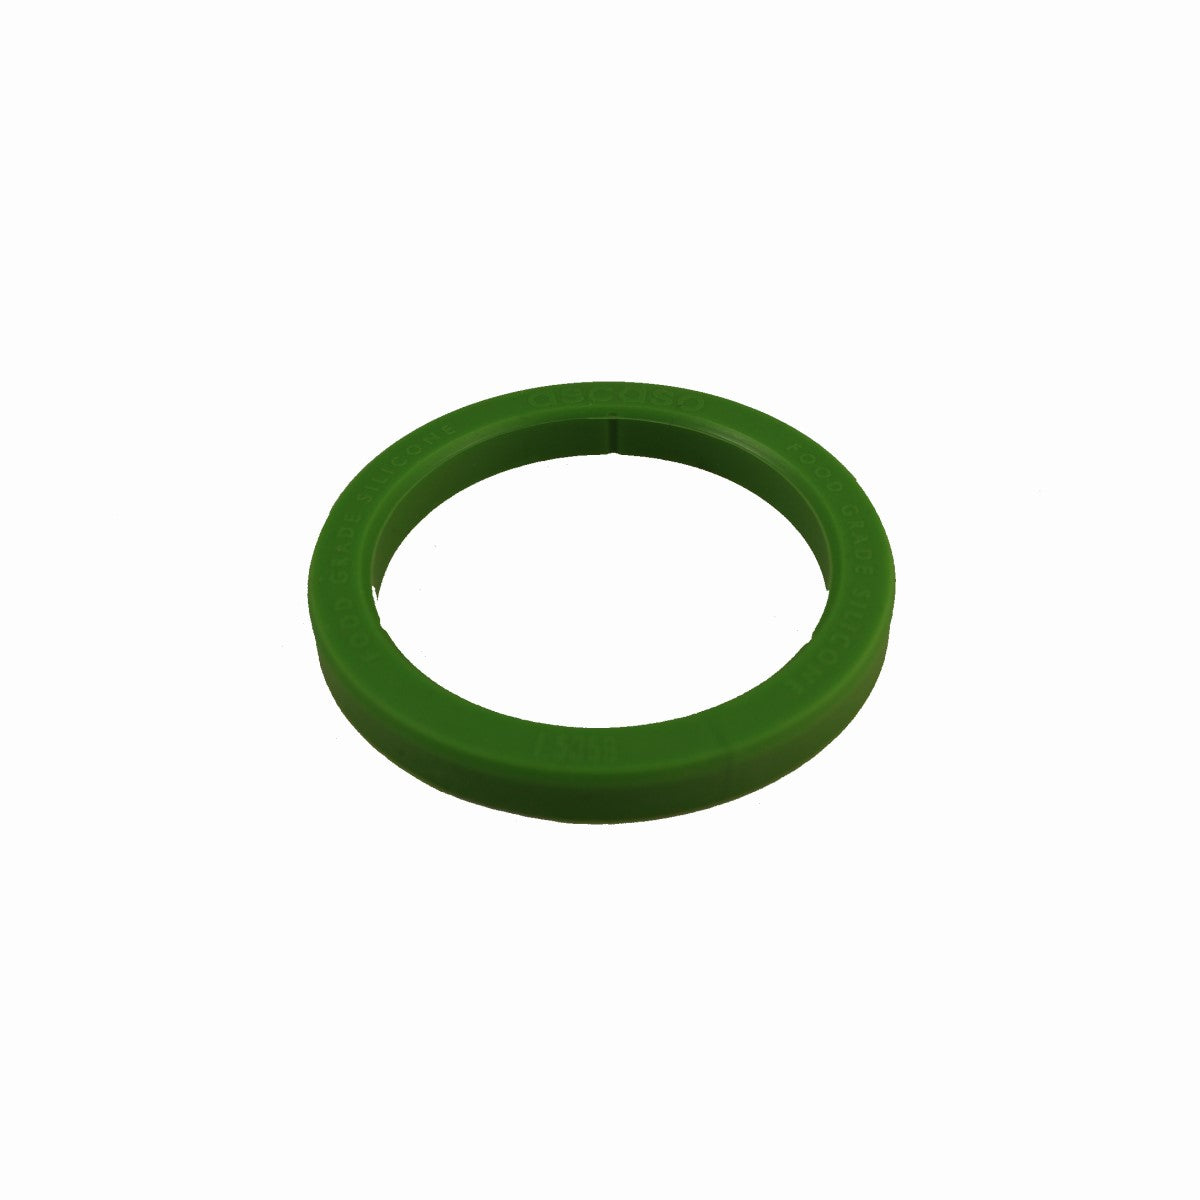 Ascaso Silicone Group Head Gasket - Green